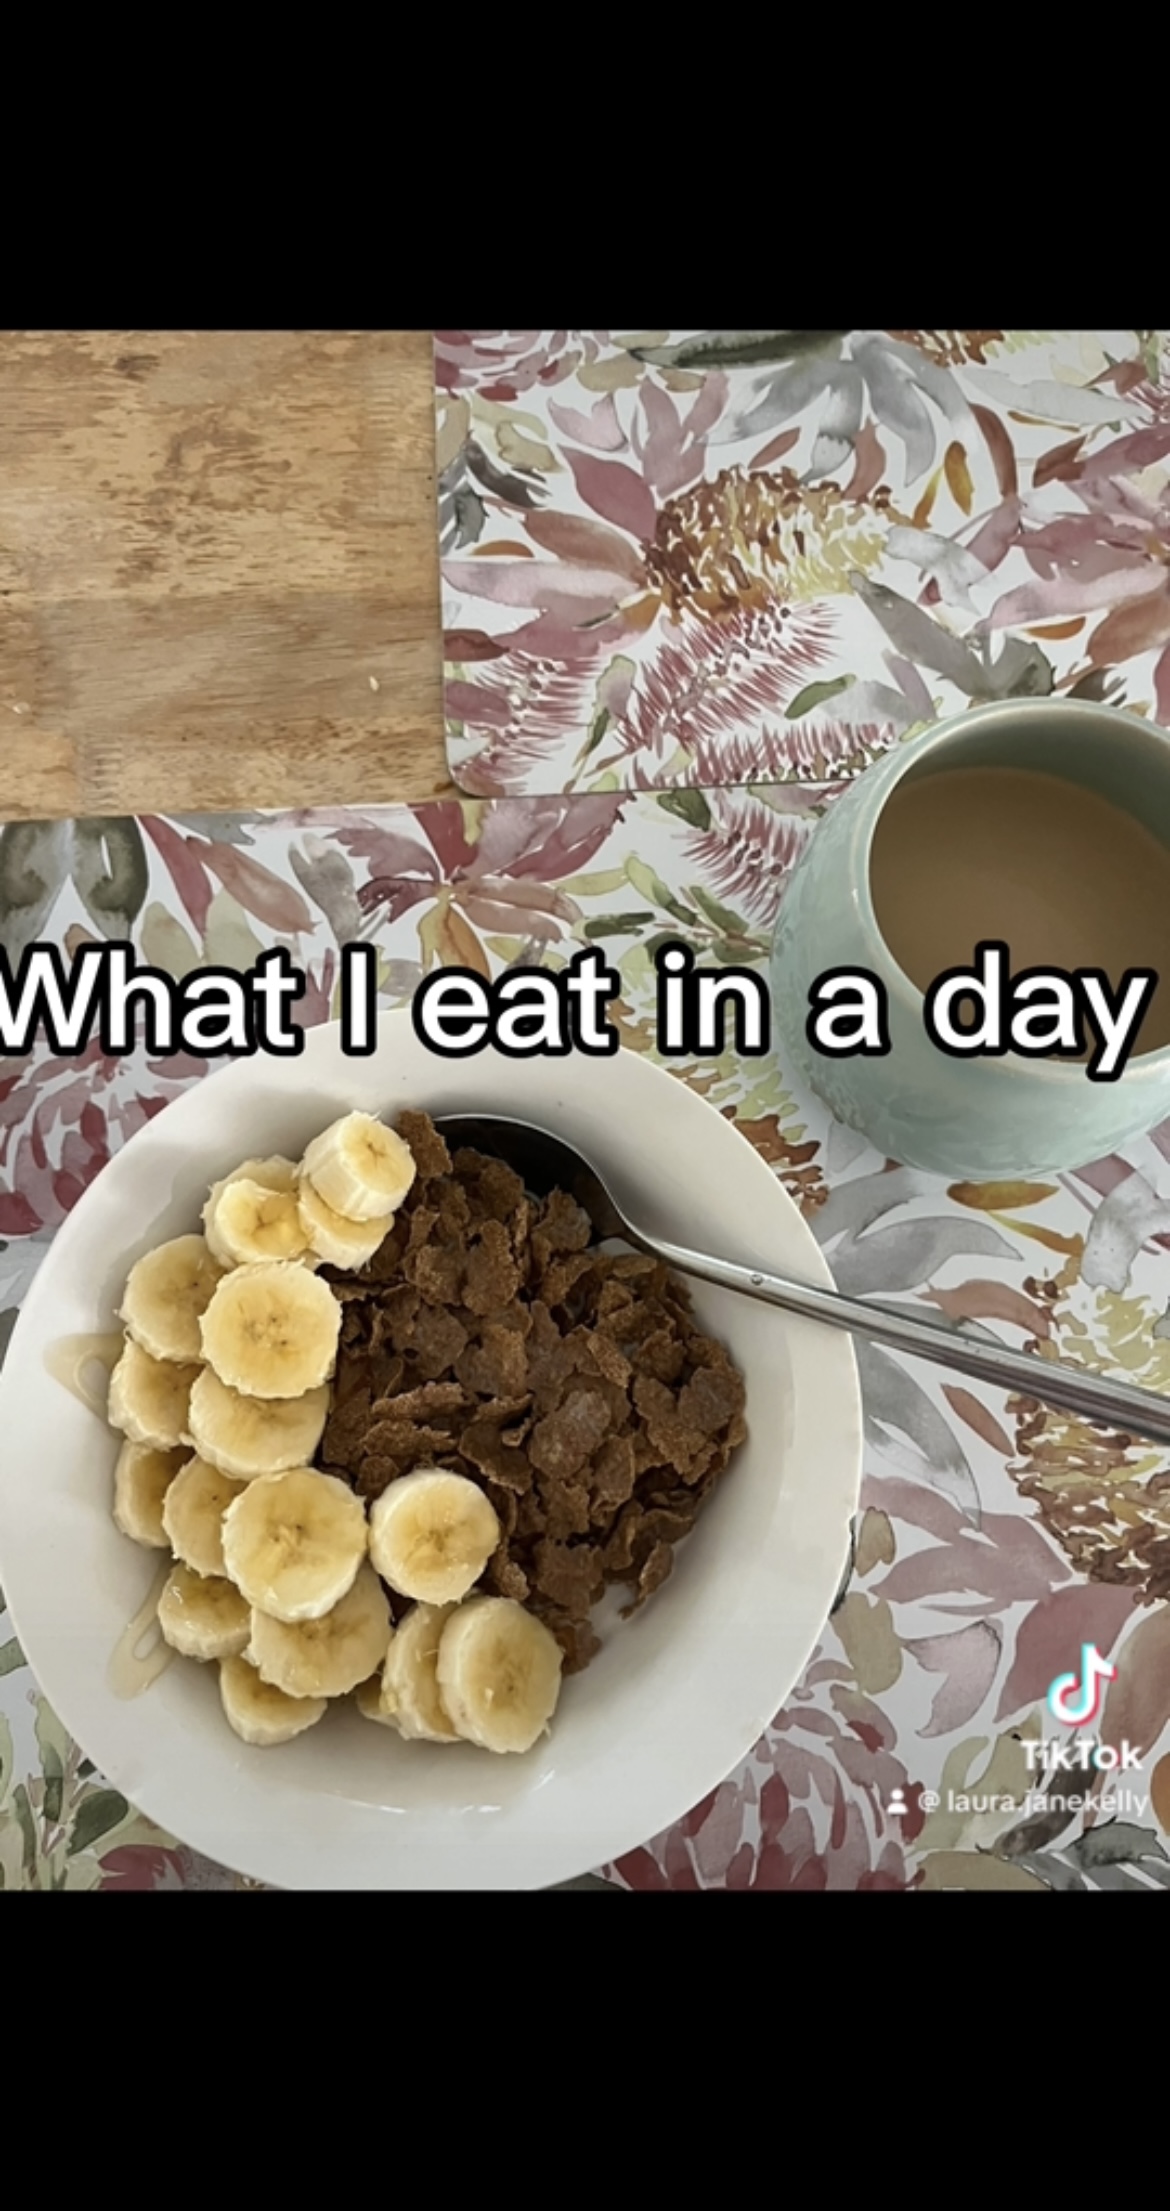 Laura Kelly – COMU3150 – Promotional Culture and the #WhatIEatInADay Trend